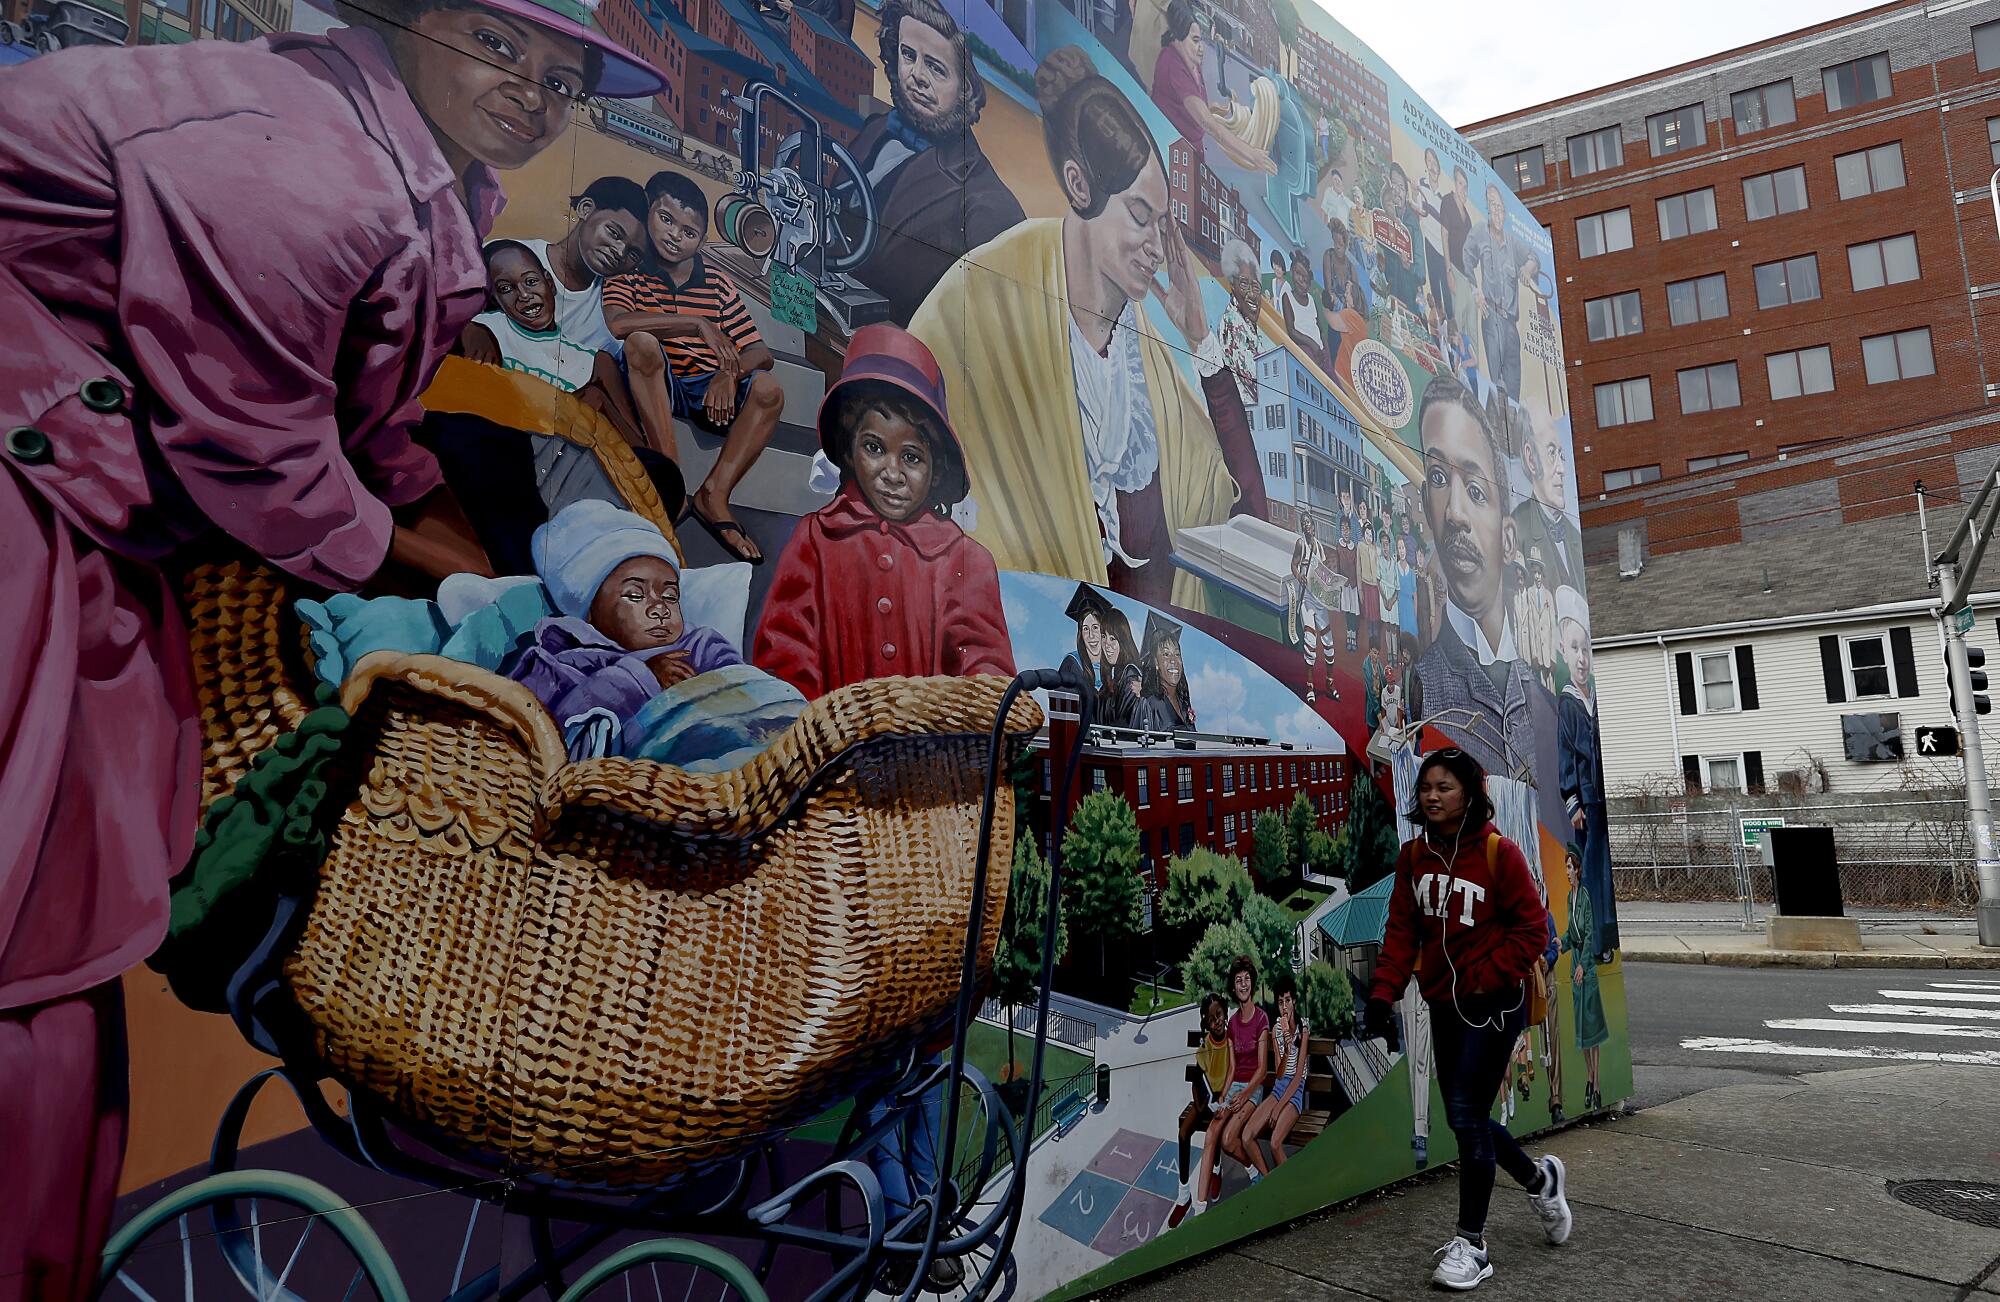 A mural depicts the history of the Port section of Cambridge, where construction fueled by high-tech startups in Kendall Square is changing the makeup of a historically black area.